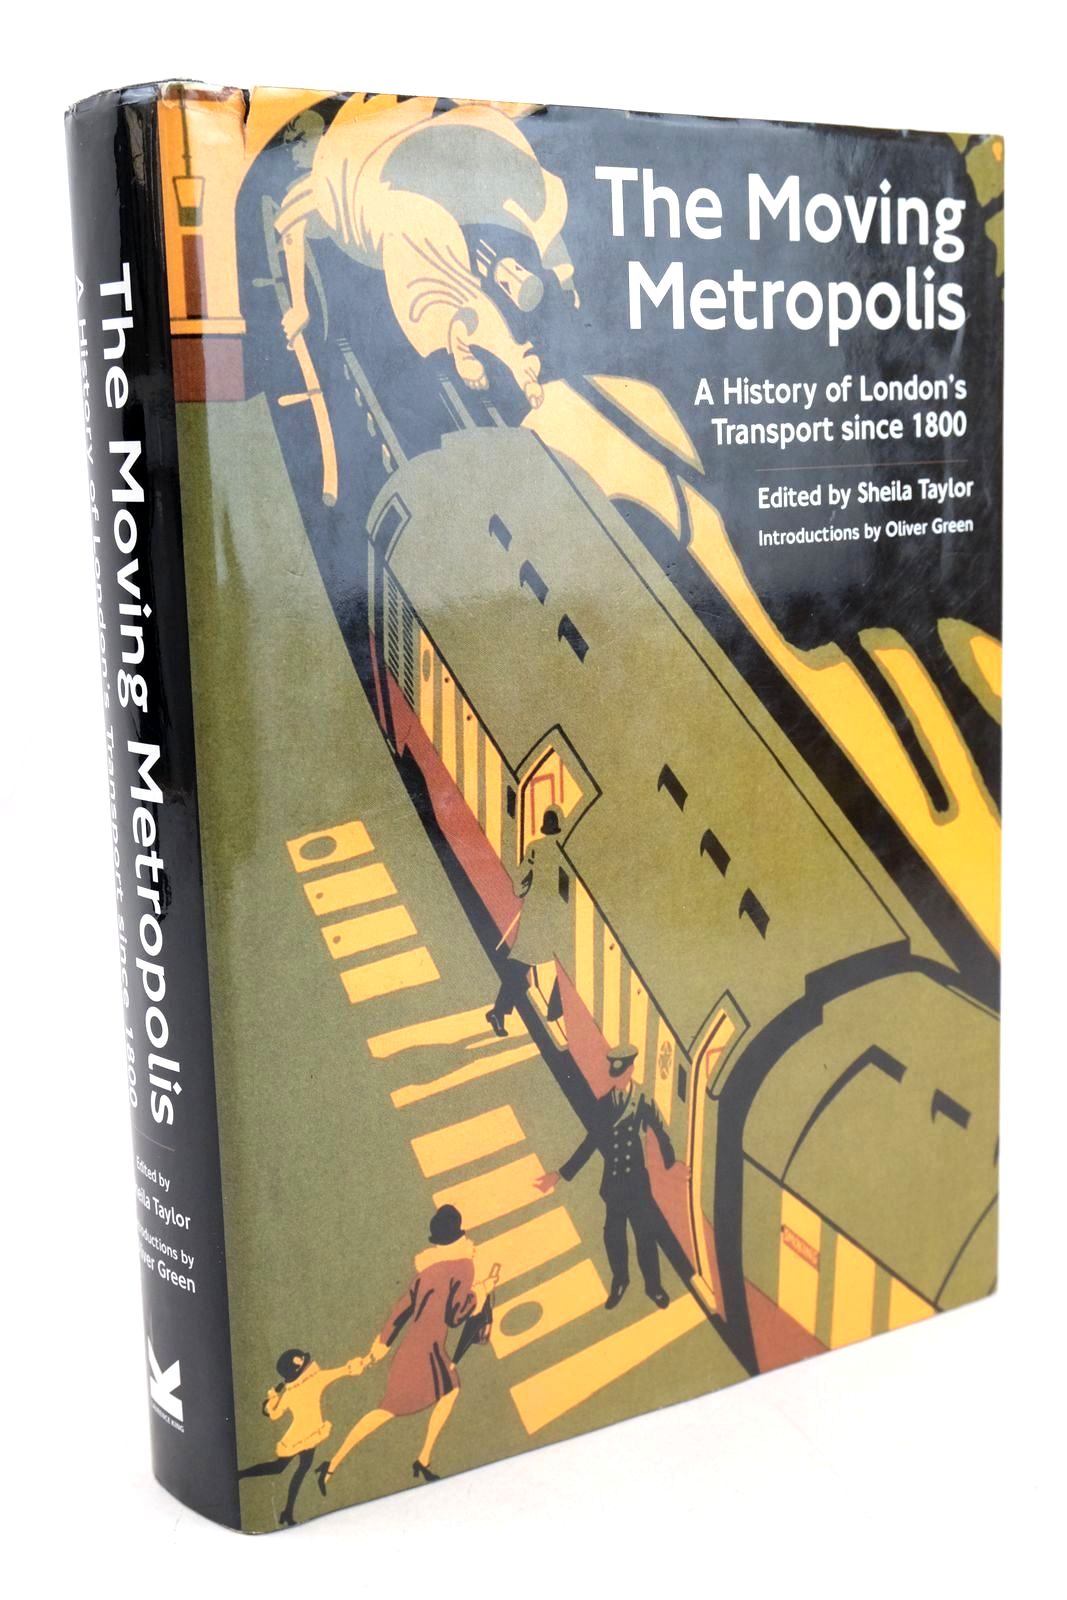 Photo of THE MOVING METROPOLIS A HISTORY OF LONDON'S TRANSPORT SINCE 1800 written by Taylor, Sheila Green, Oliver published by Laurence King Publishing (STOCK CODE: 1327548)  for sale by Stella & Rose's Books